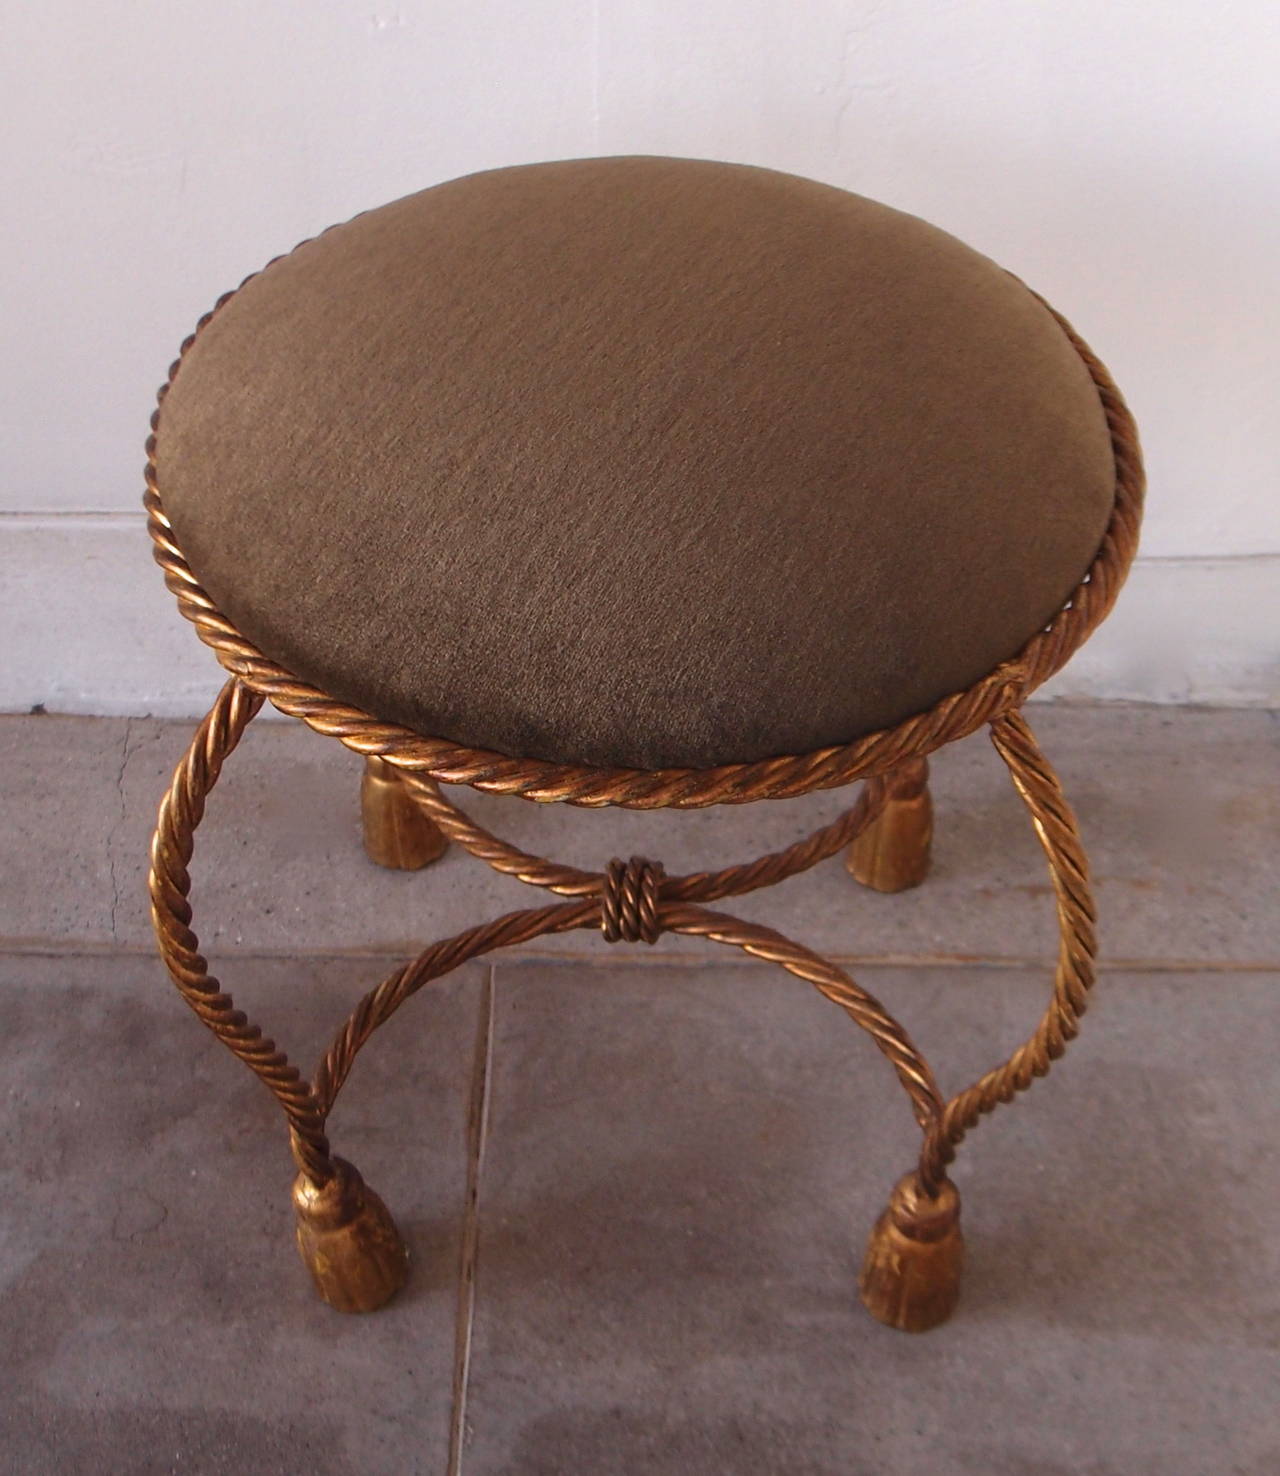 Classic Italian gilded rope vanity stool with lovely tassle feet.  The seat has been recovered in a luxurious moss green mohair.  The seat circumference is 16